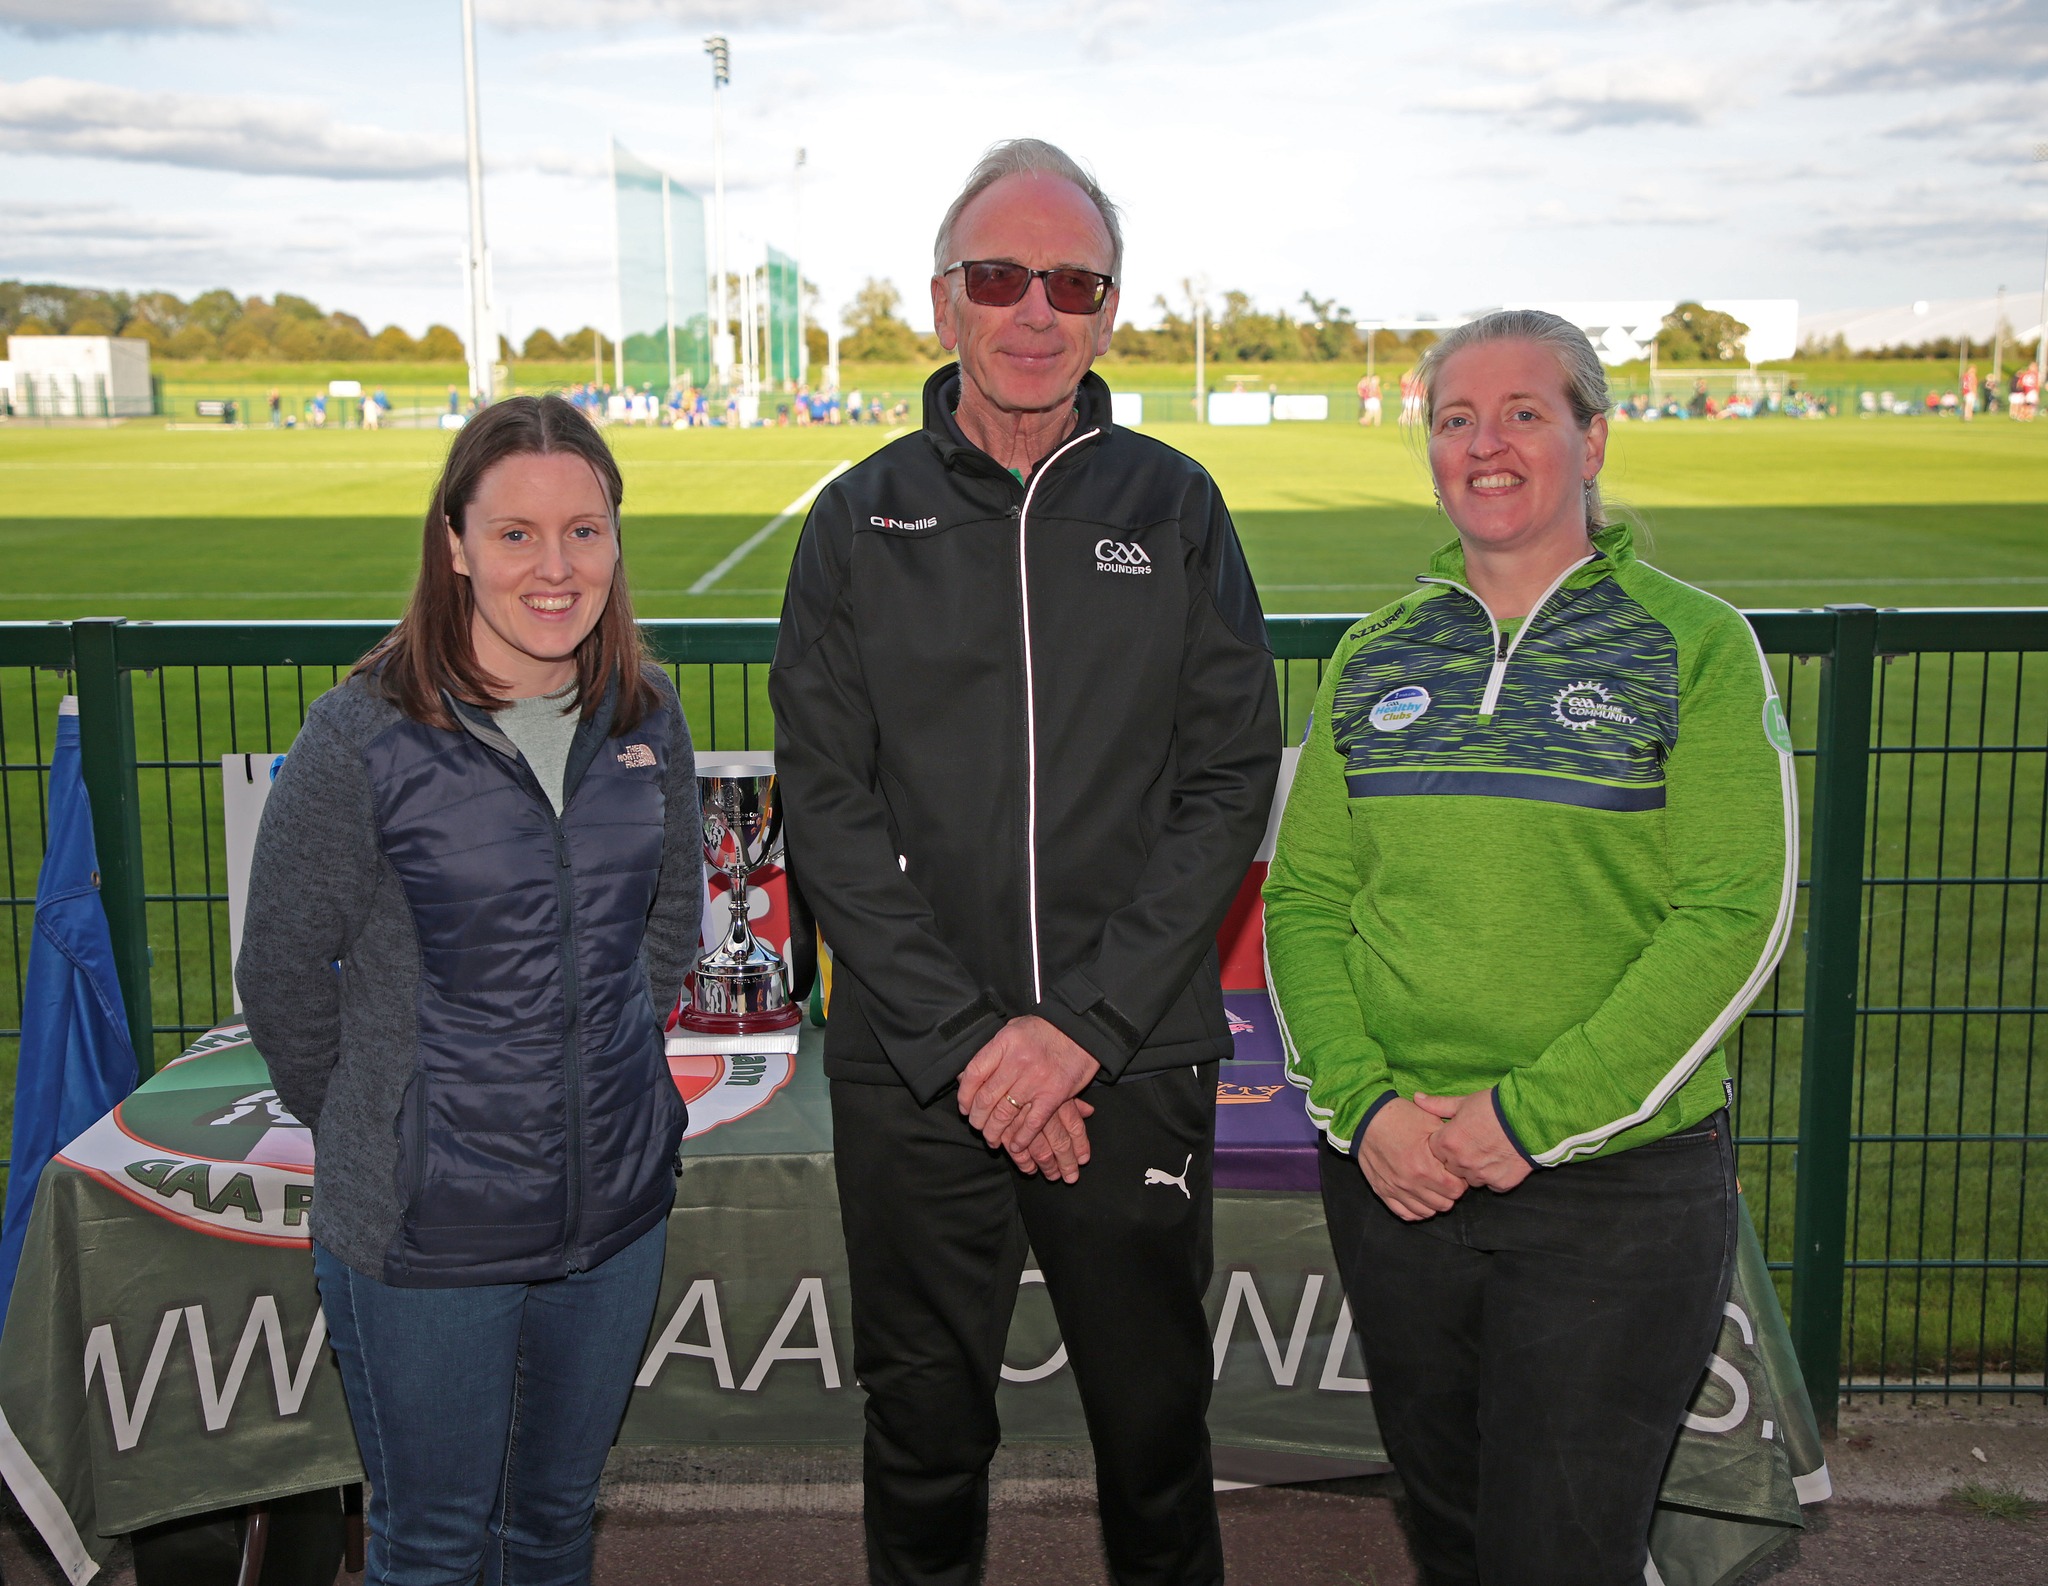 'Upstart' launched to promote Women in Rounders with GAA and Sport Ireland backing